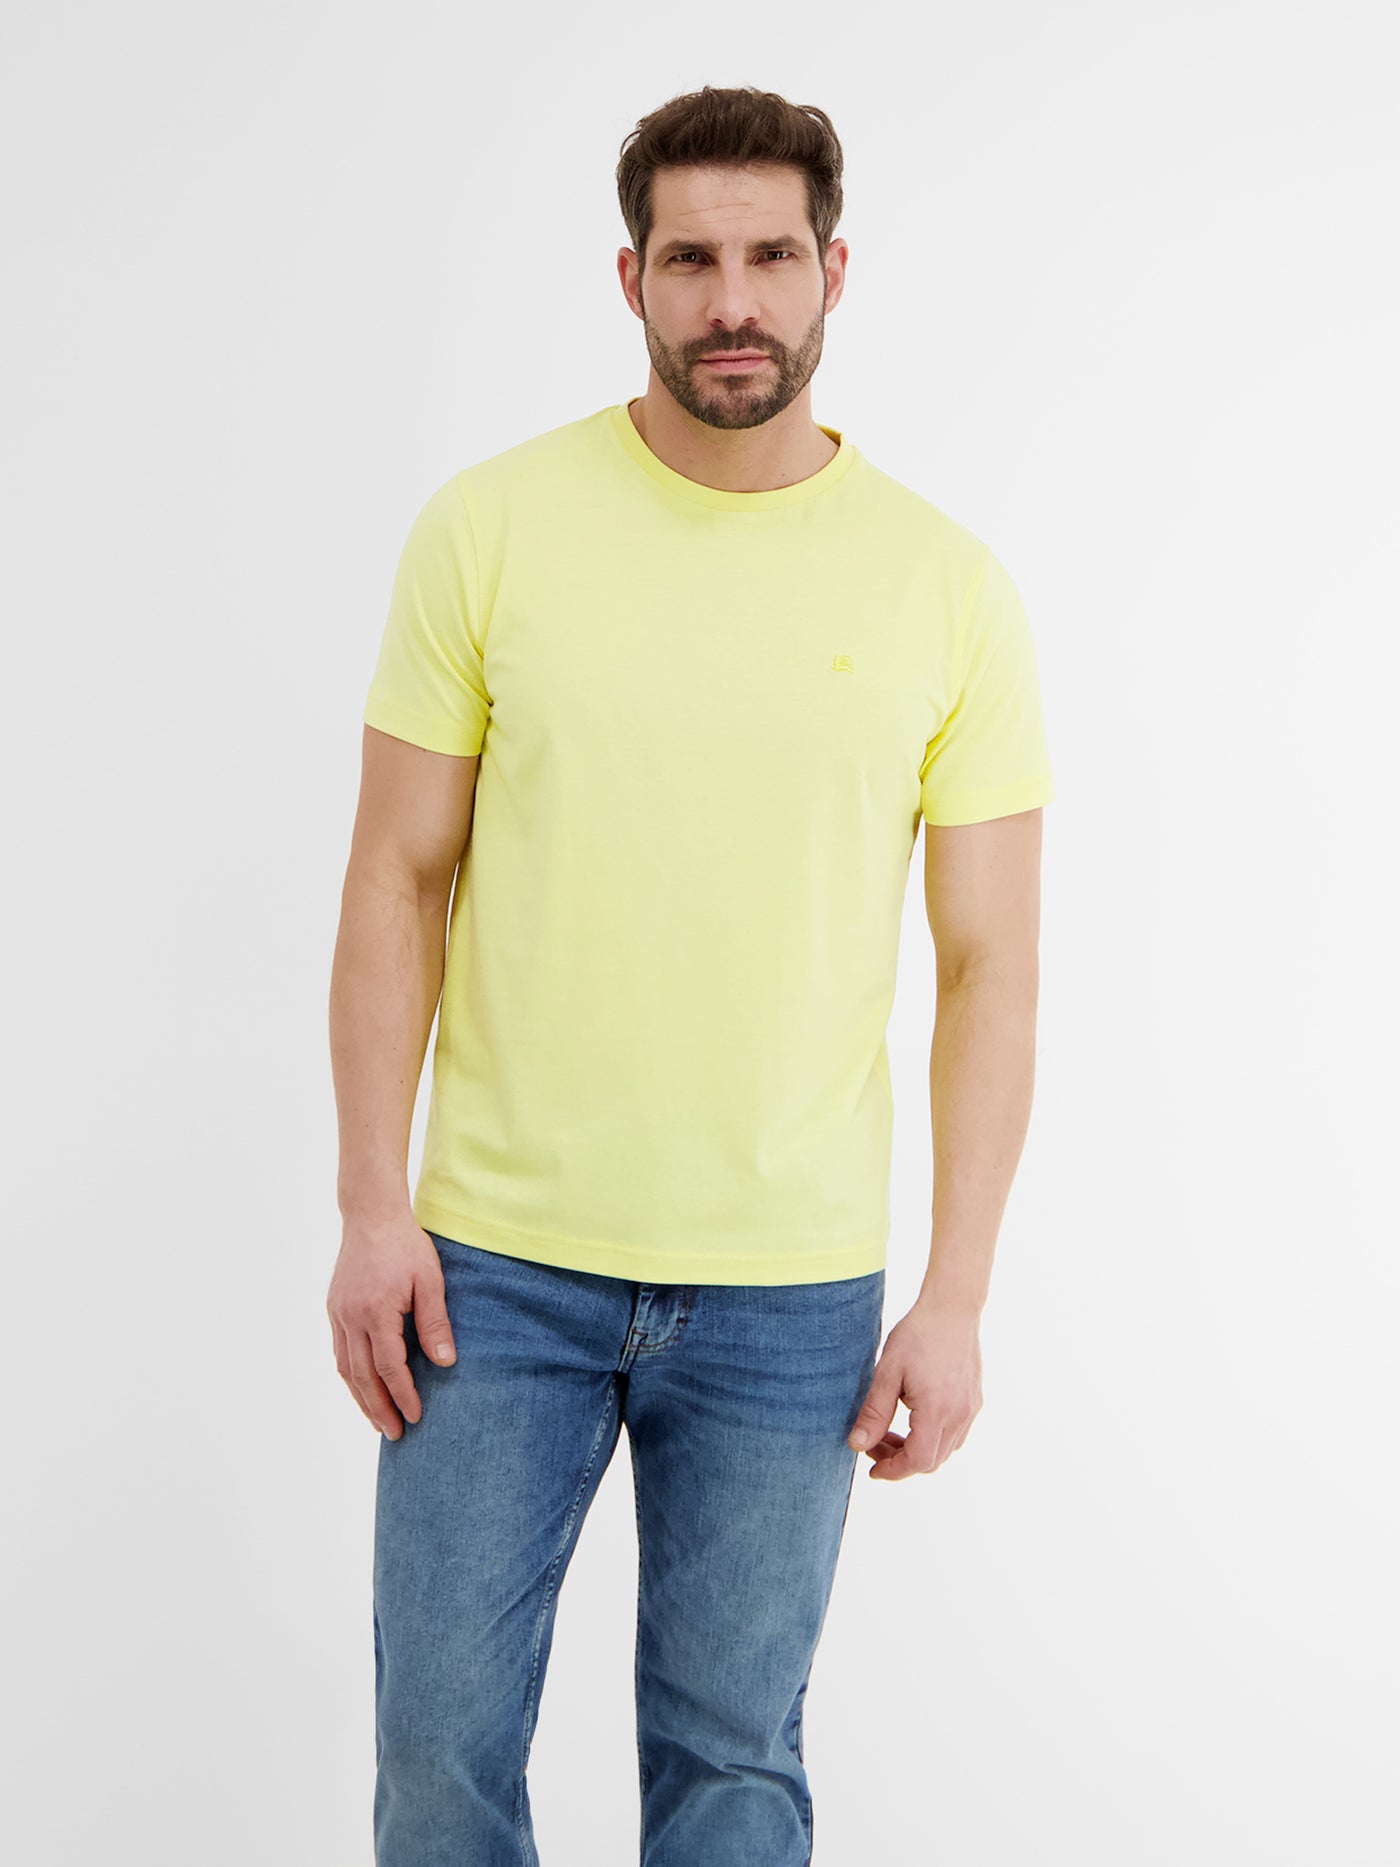 Crew neck t-shirt made from sustainably sourced cotton